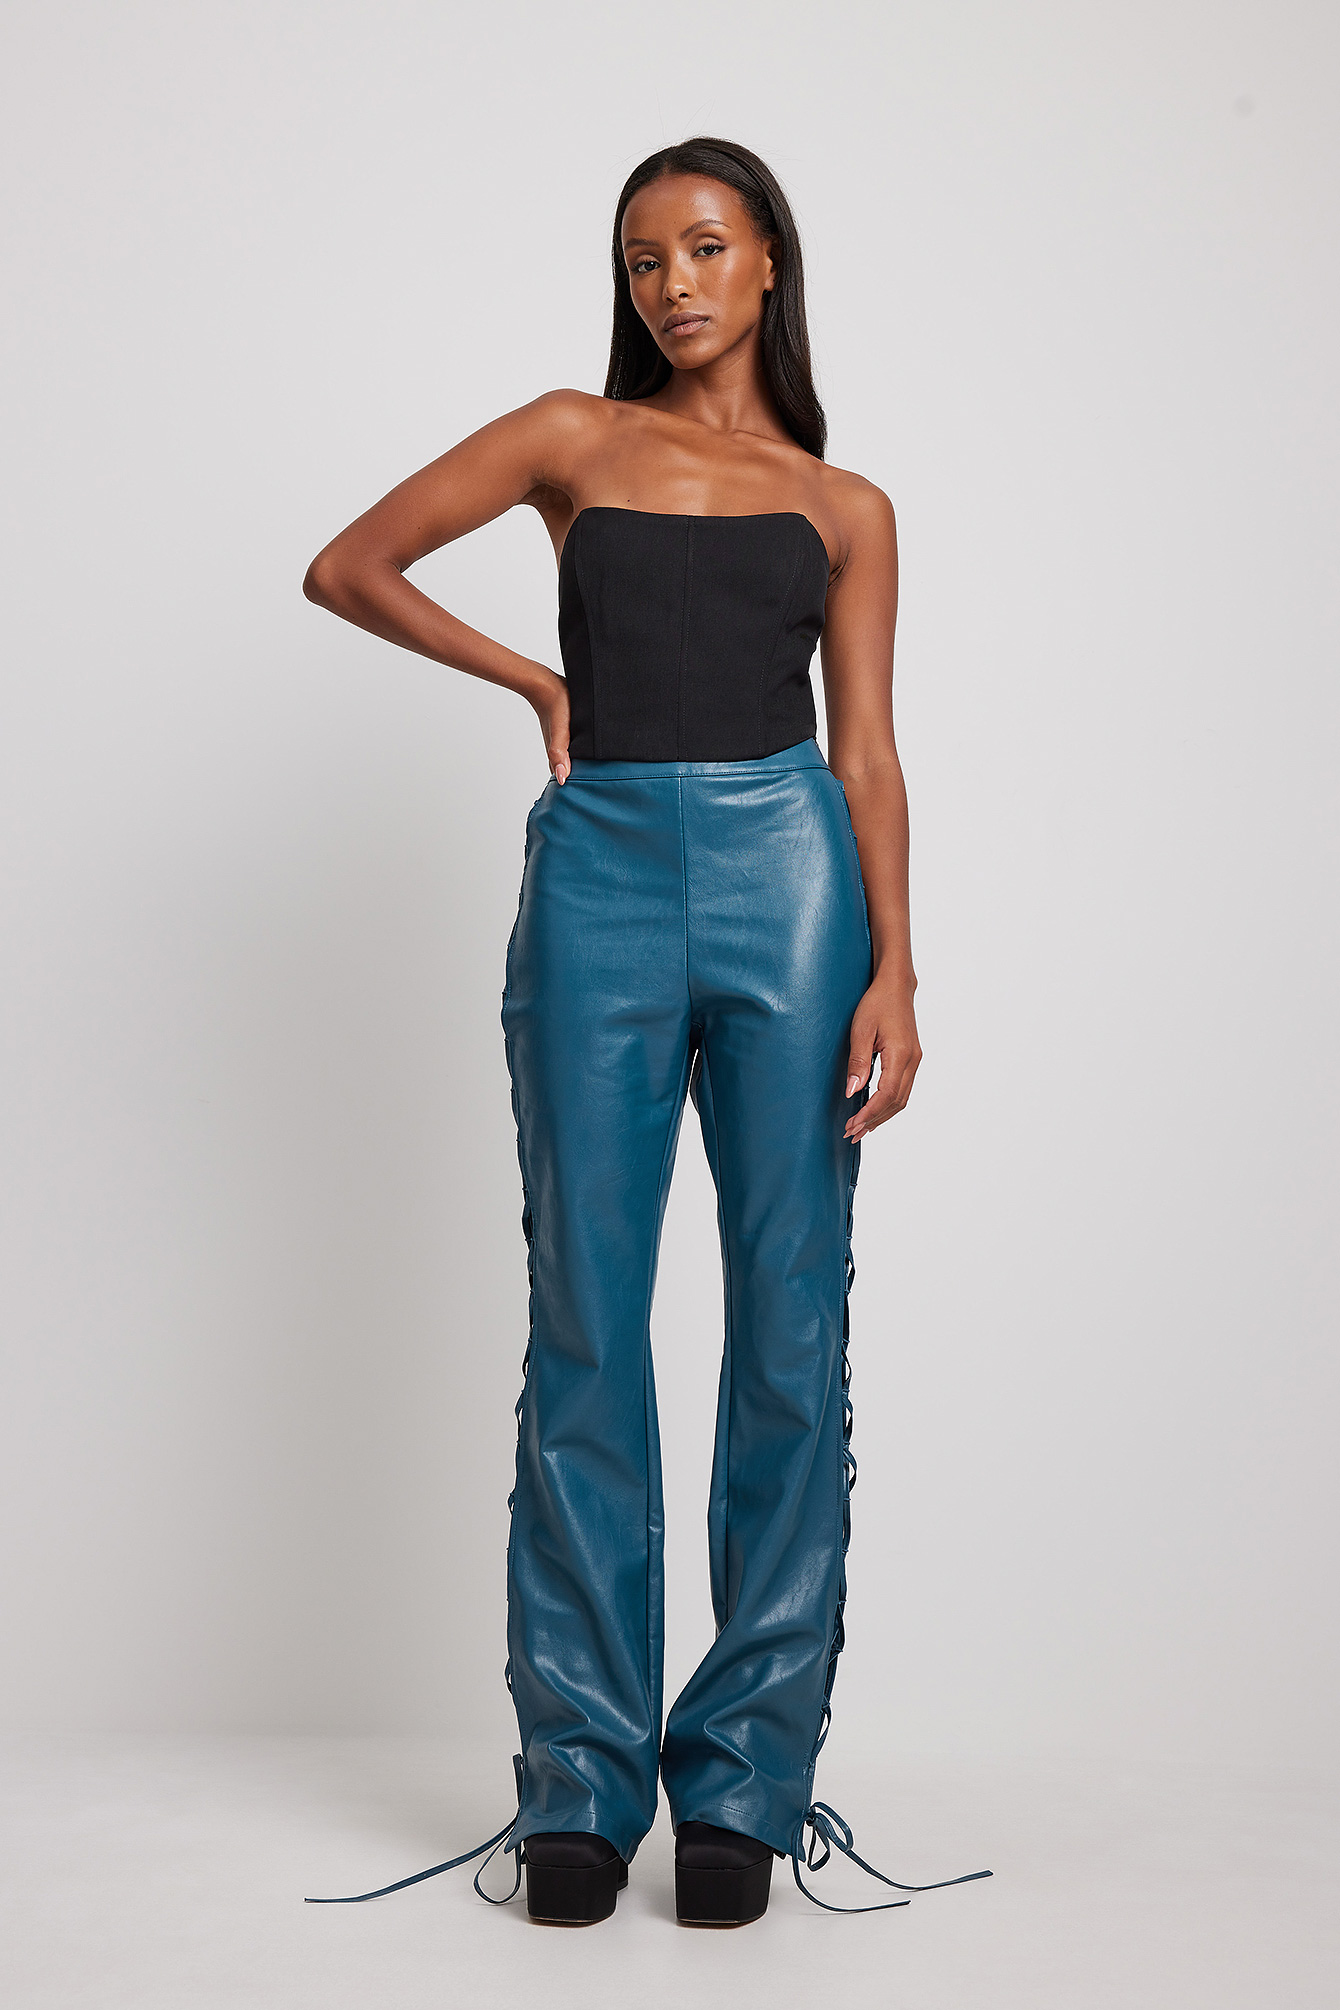 Melody High Waisted Faux Leather Pants Stretch Blue Leather Jeans Plain  Trousers Latex Leggings Women Lifting Hip Pants